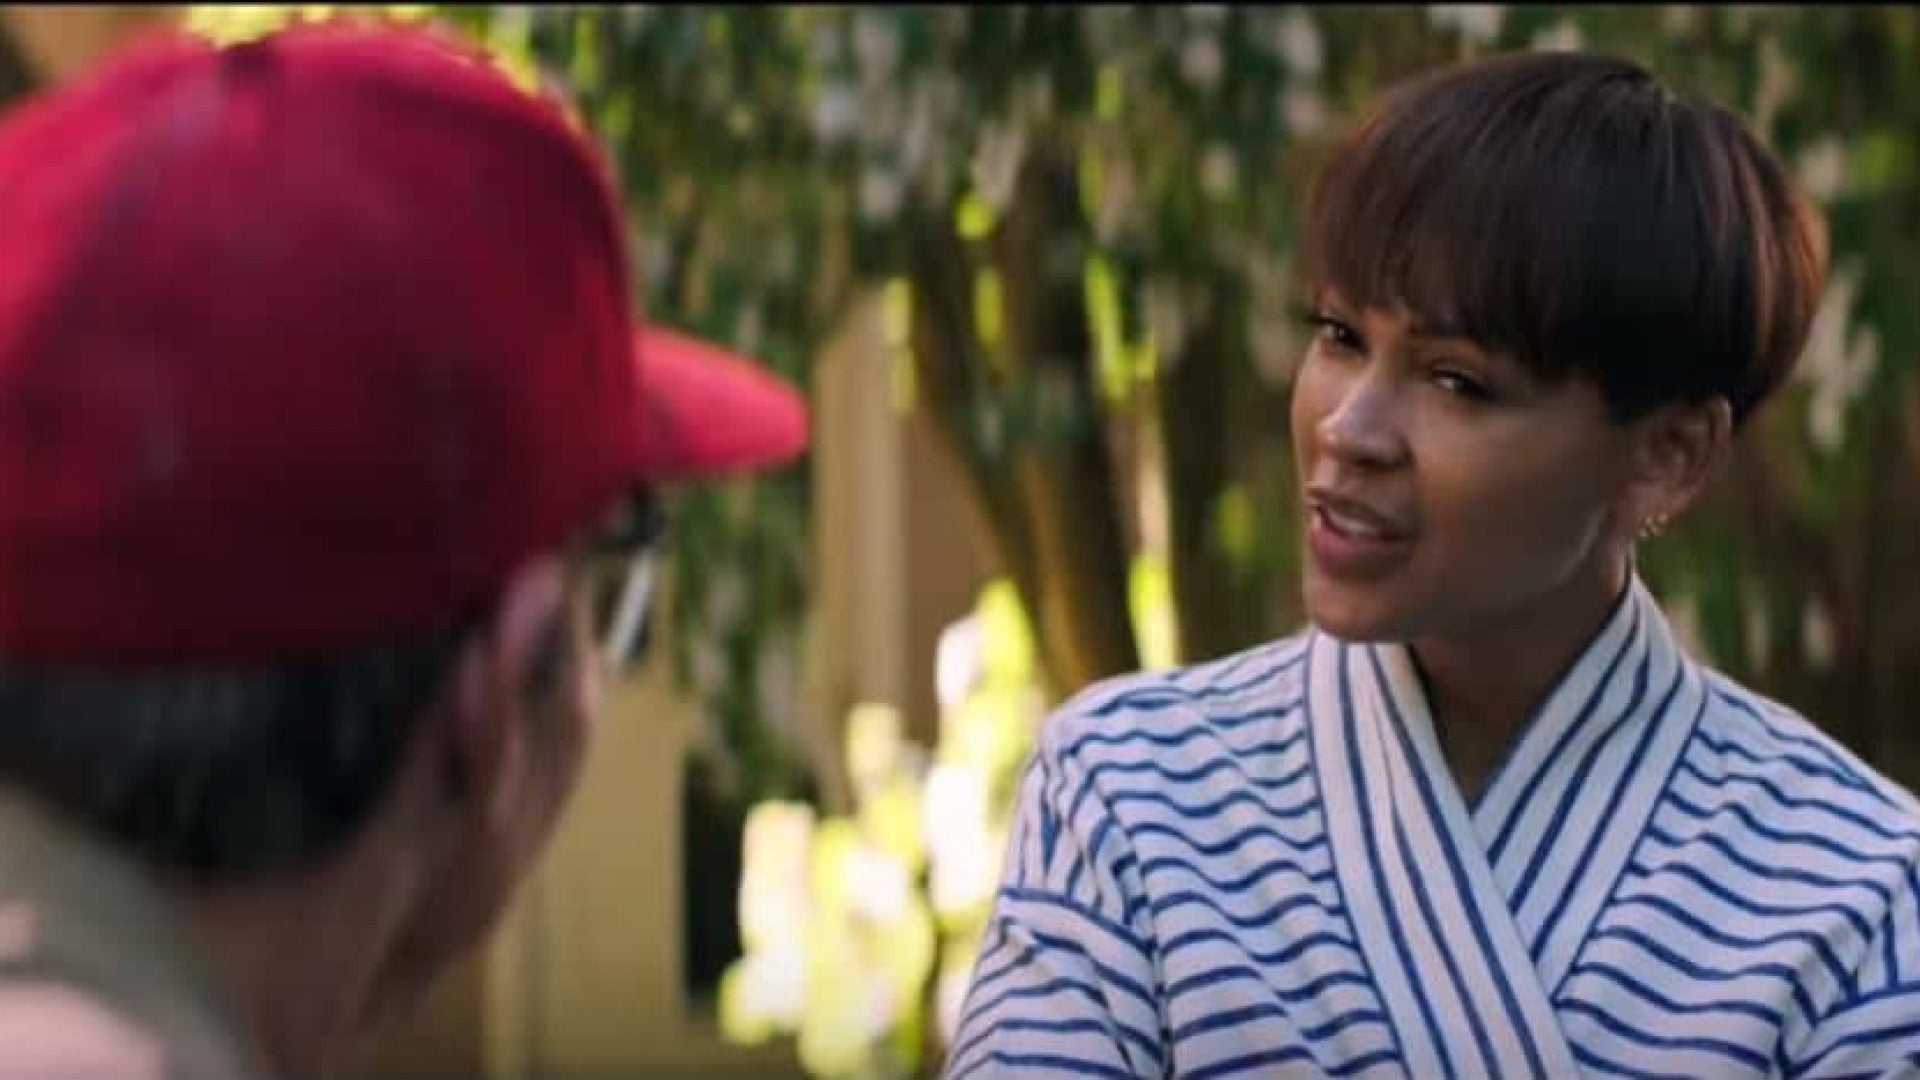 Watch Meagan Good And Michael Ealy Face Off Against A Creepy Homeowner In ‘The Intruder’